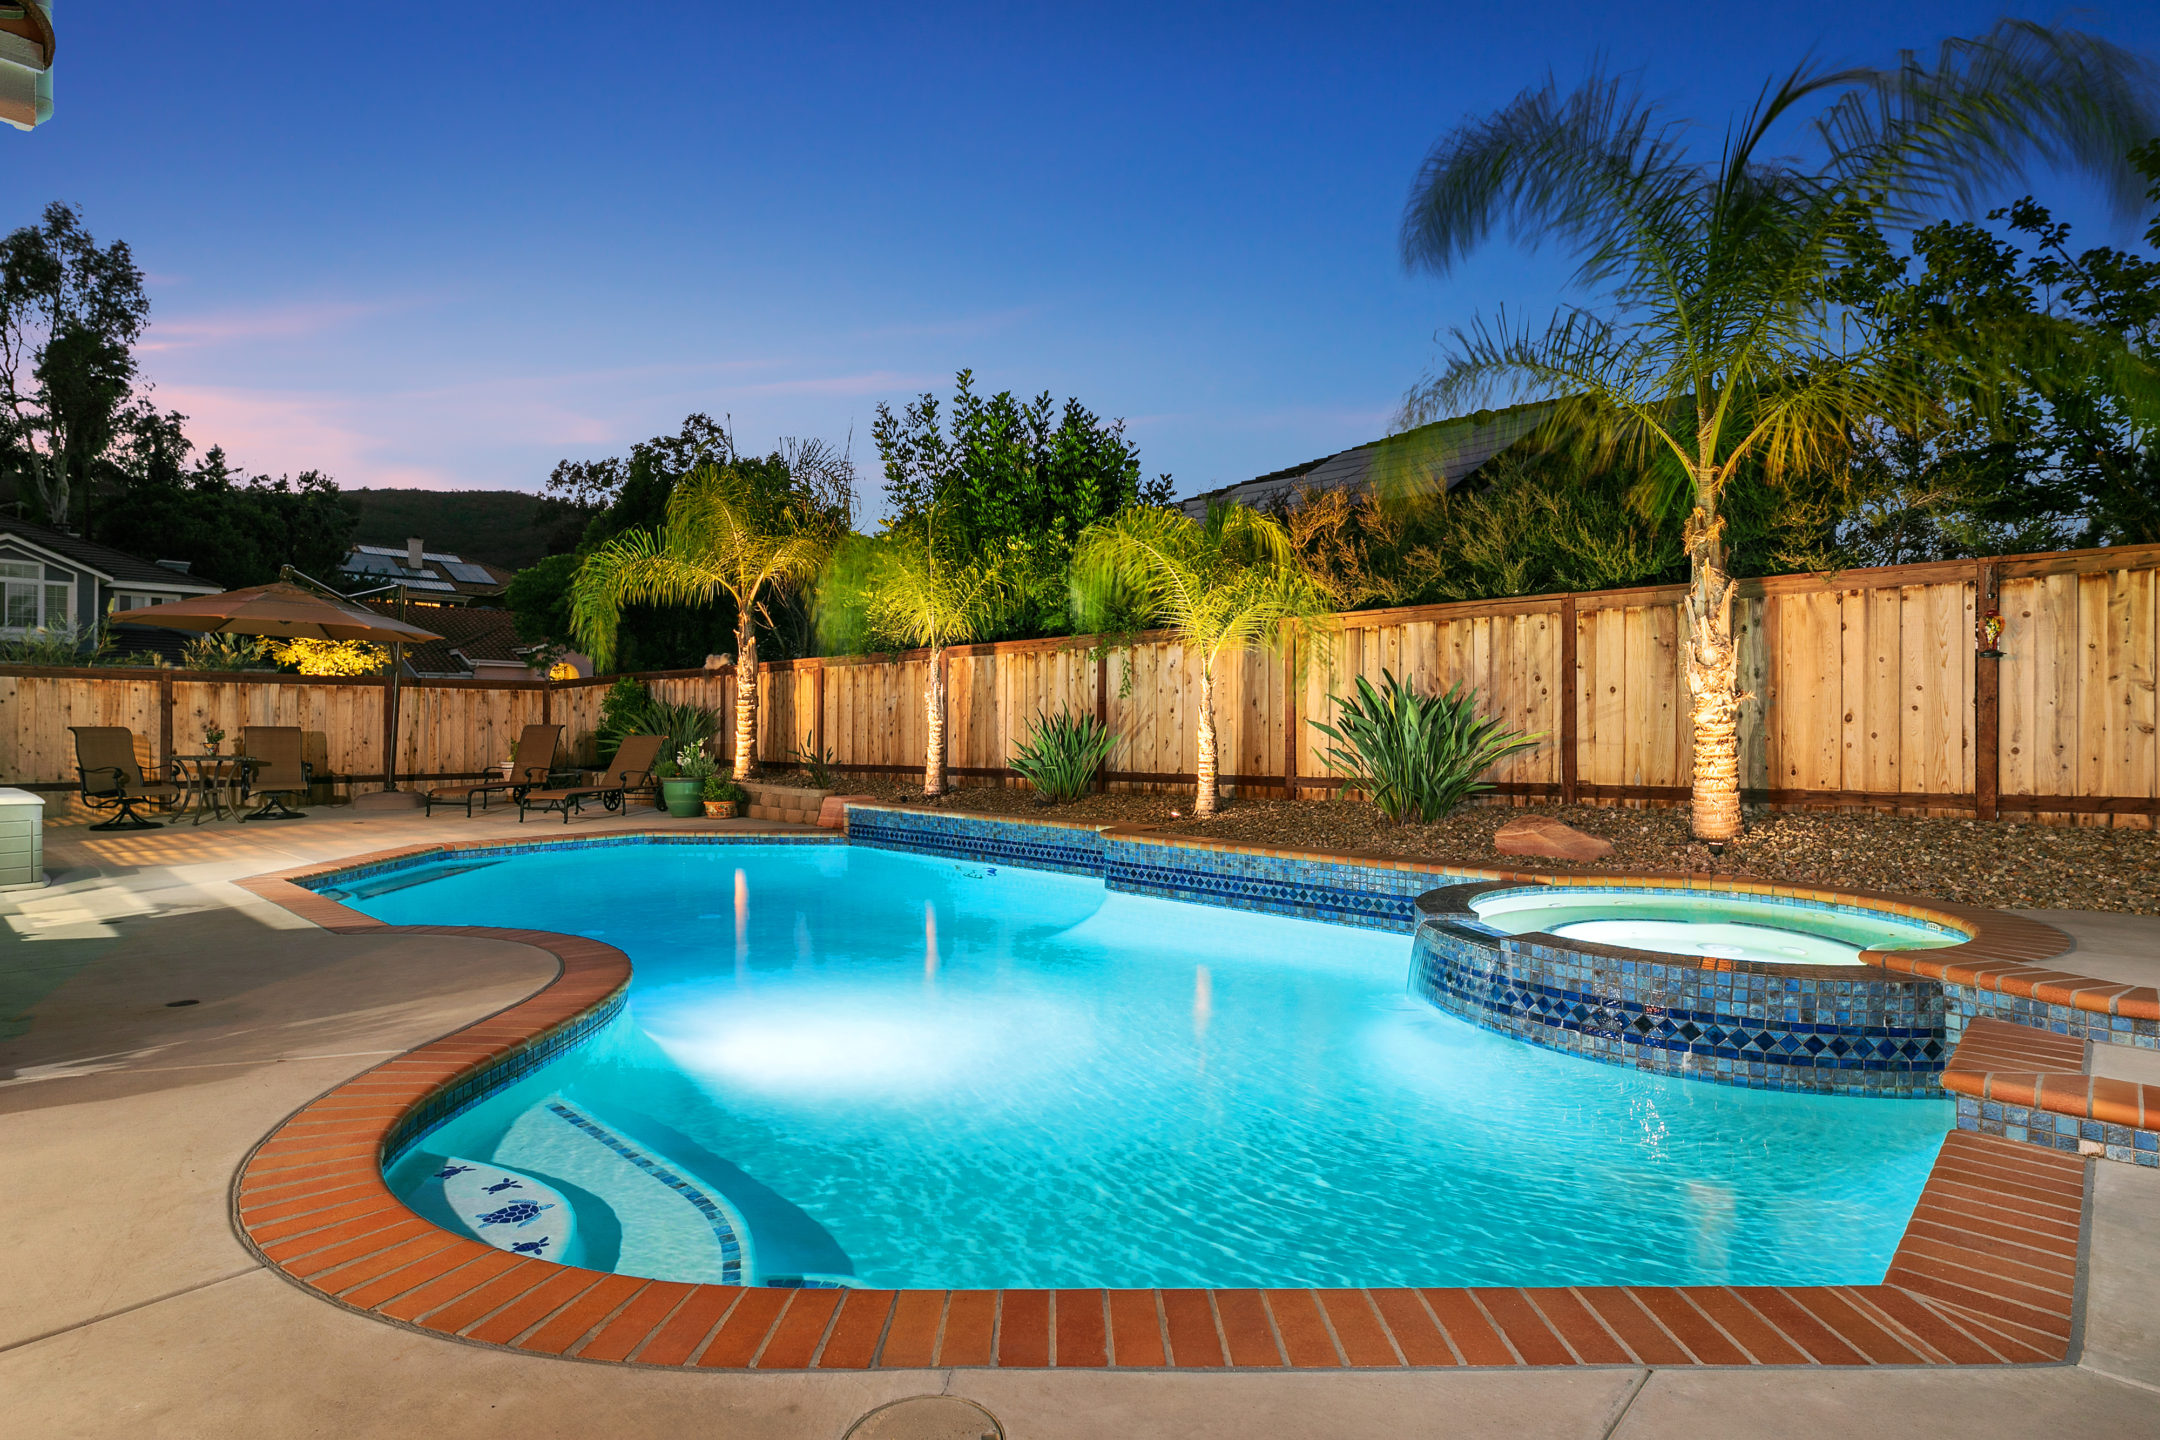 Do Pools Add Value? What You Need to Know Before Taking the Plunge